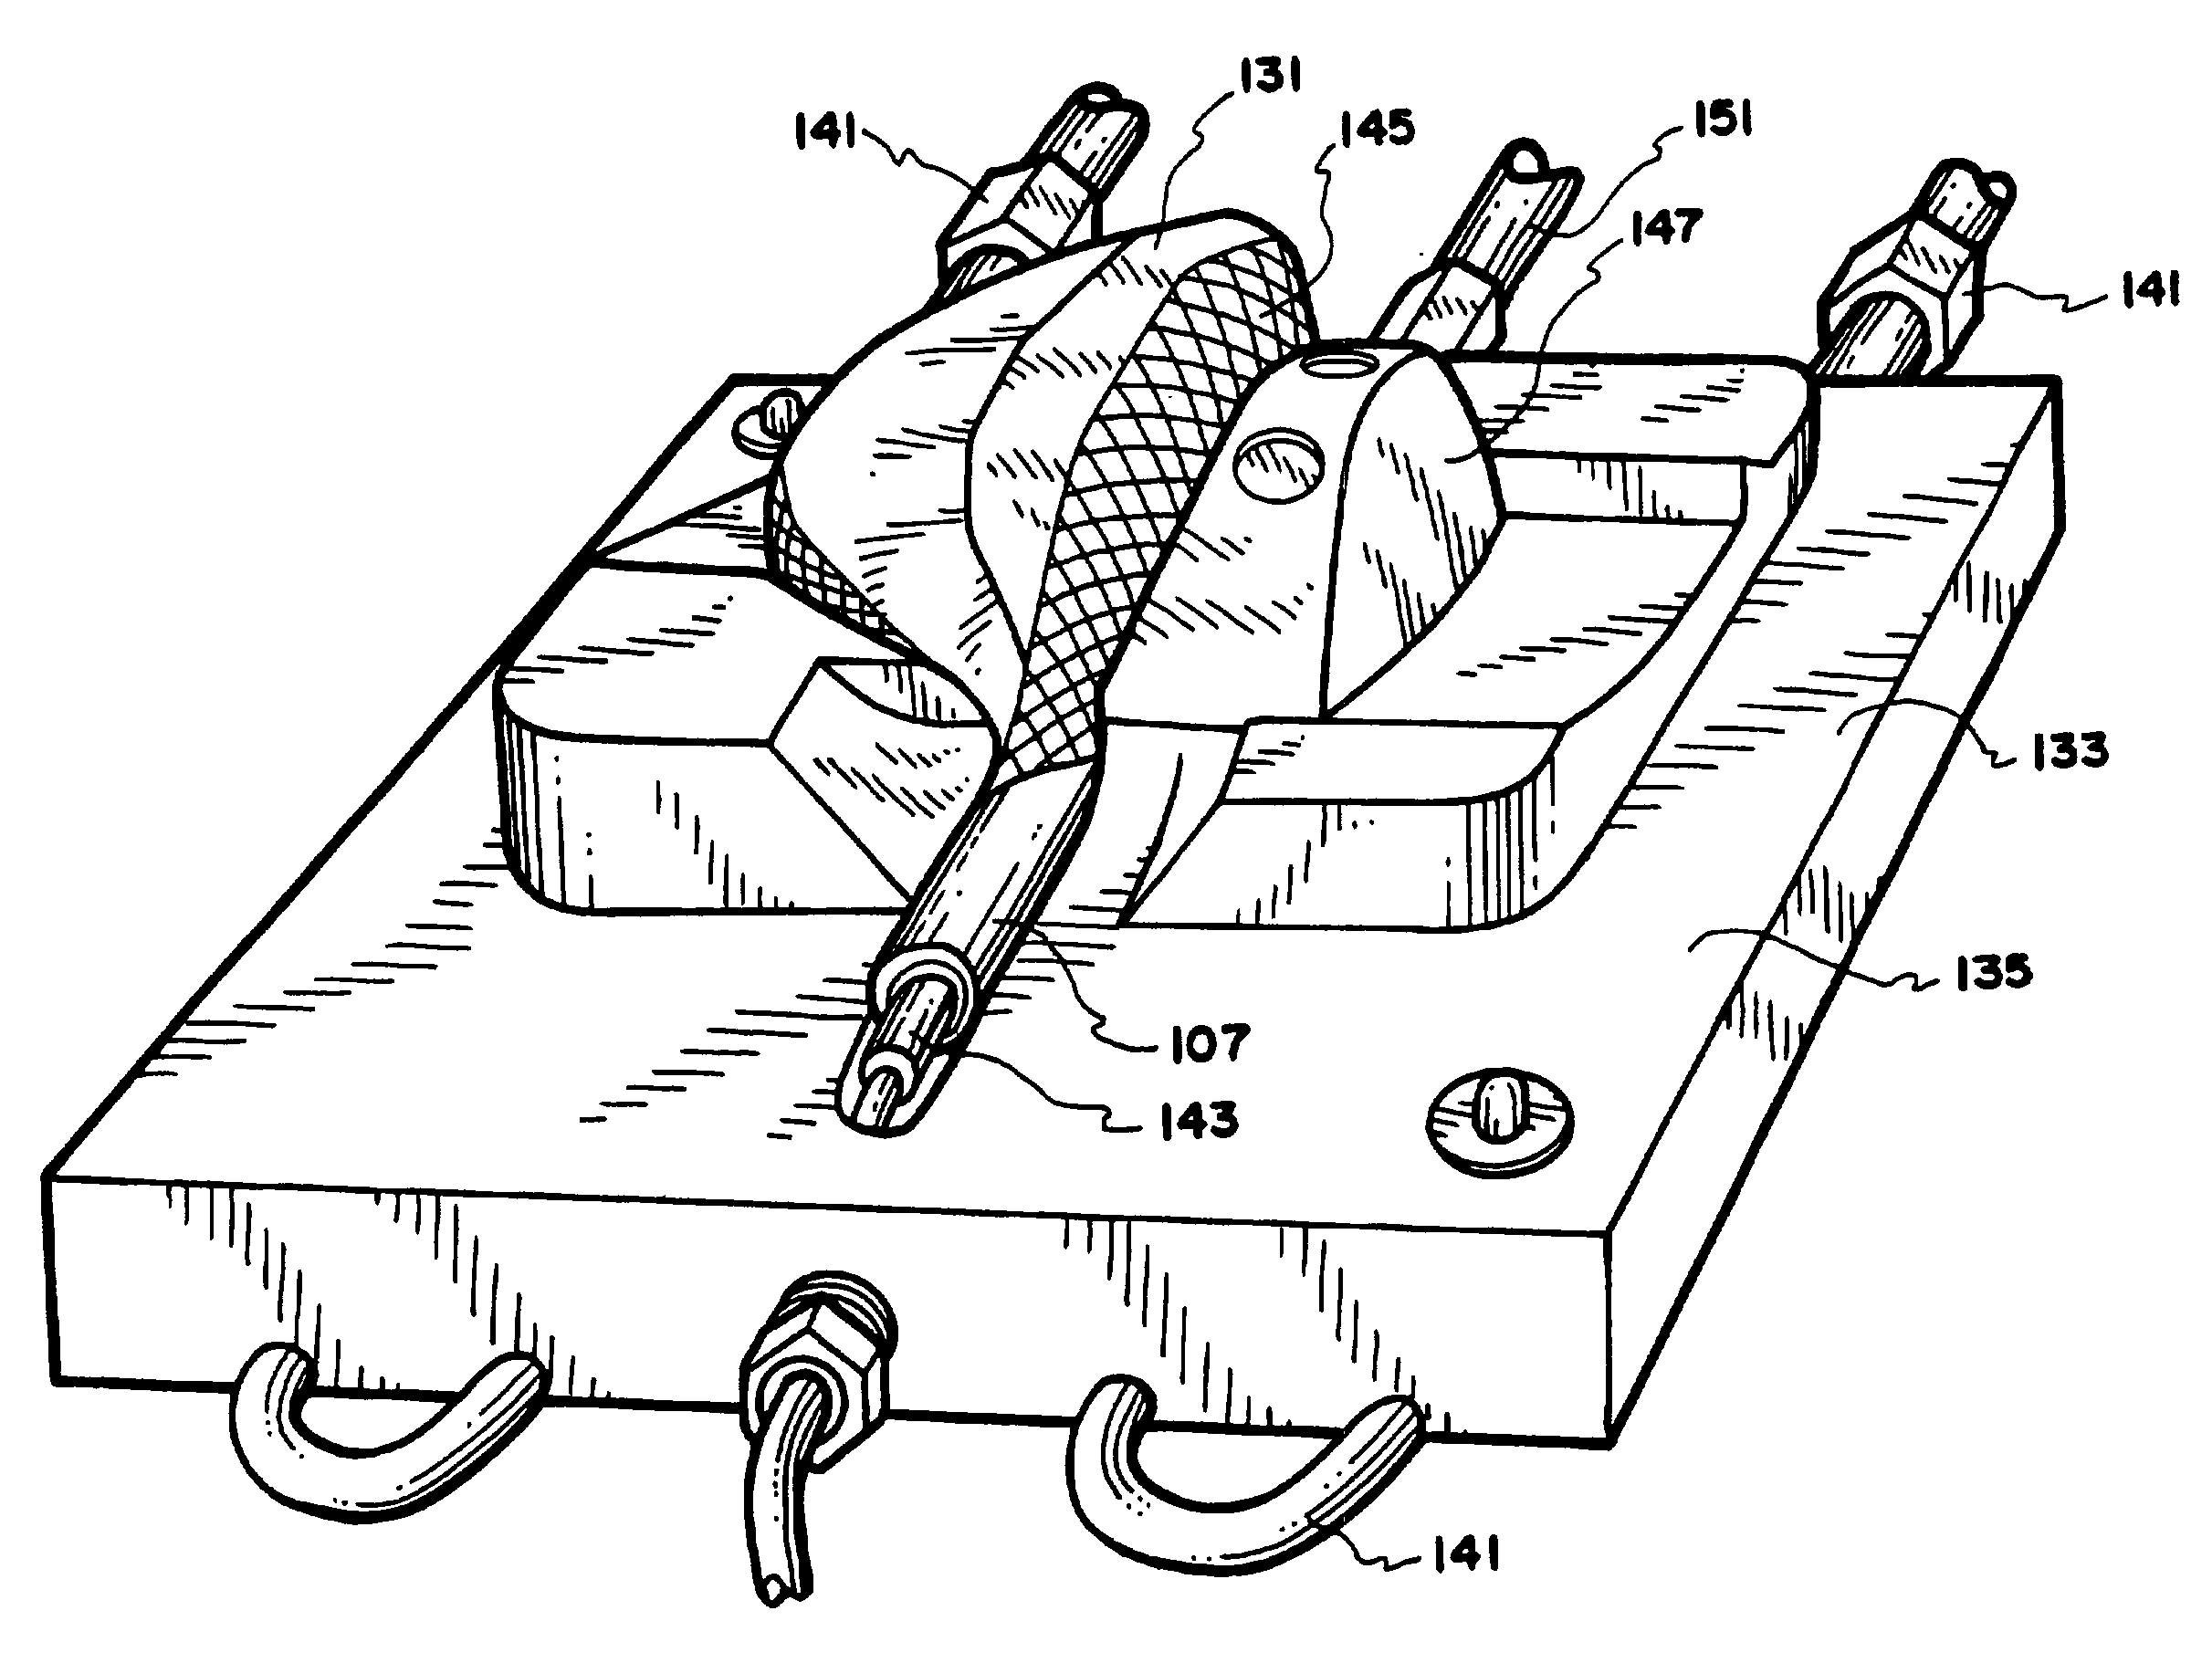 Method of manufacturing a composite golf club head